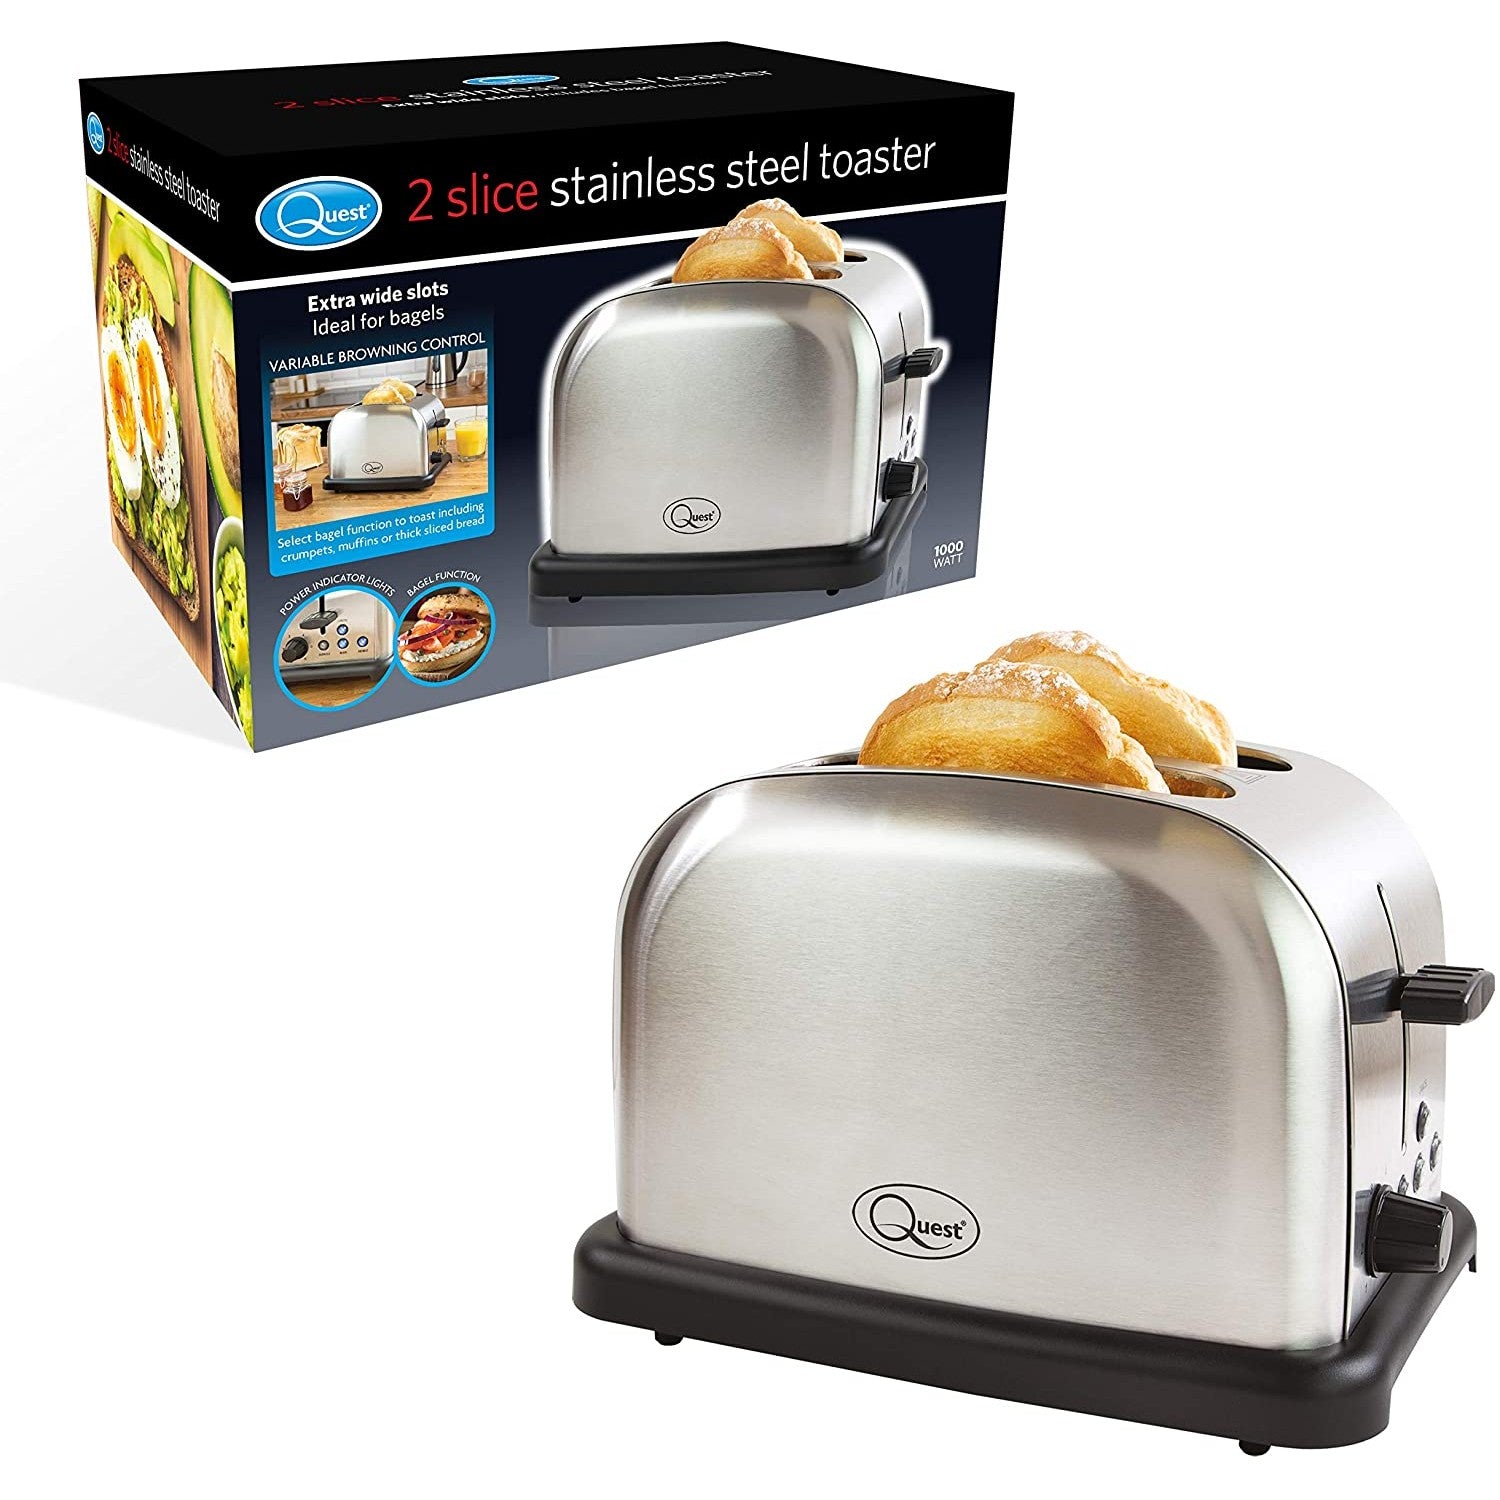 Quest 2 Slice Stainless Steel Toaster